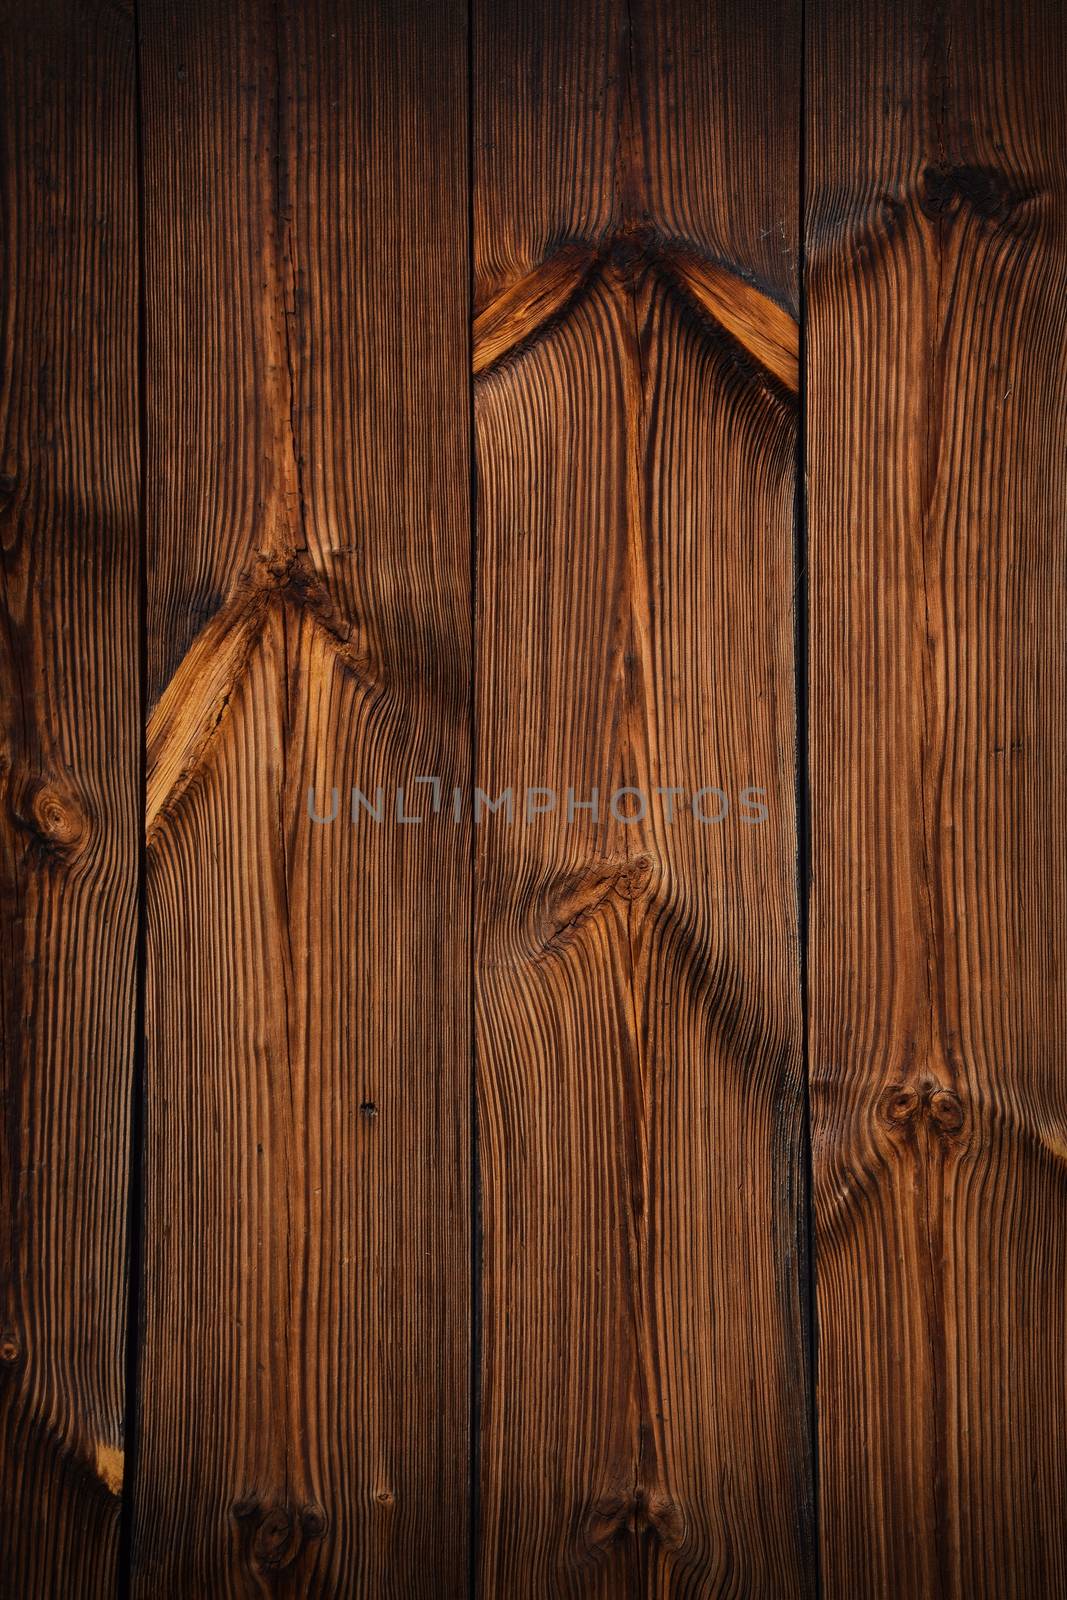 Brown vintage old wooden panel texture background with vertical unpainted aged planks and gaps and darker shaded border